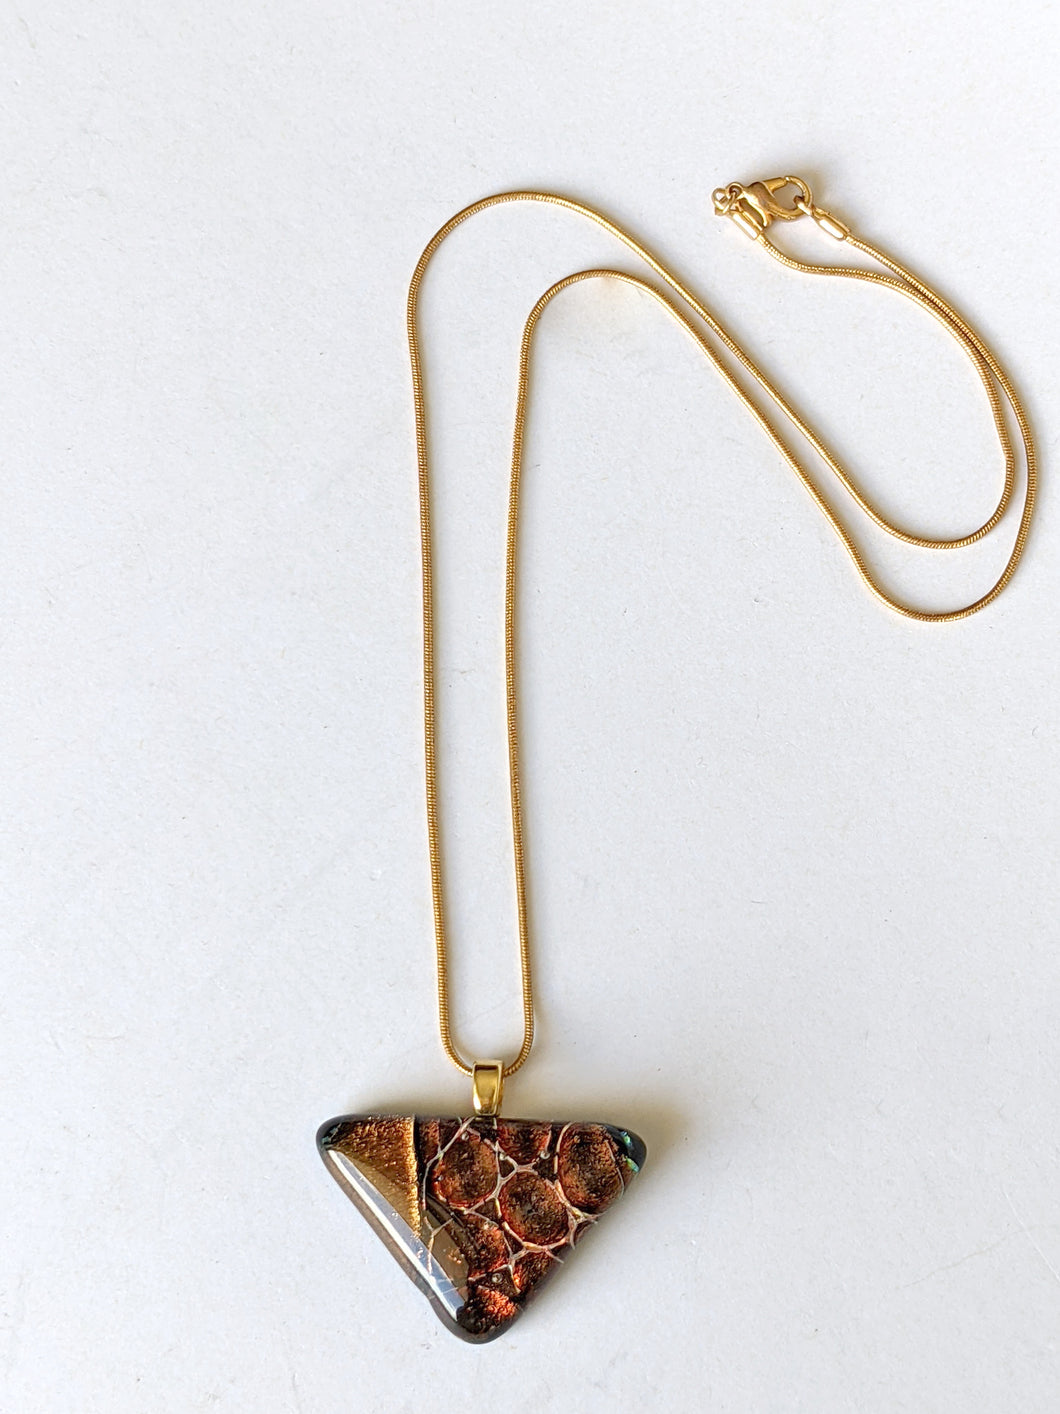 Dichroic Glass Pendant With Gold Chain  SOLD